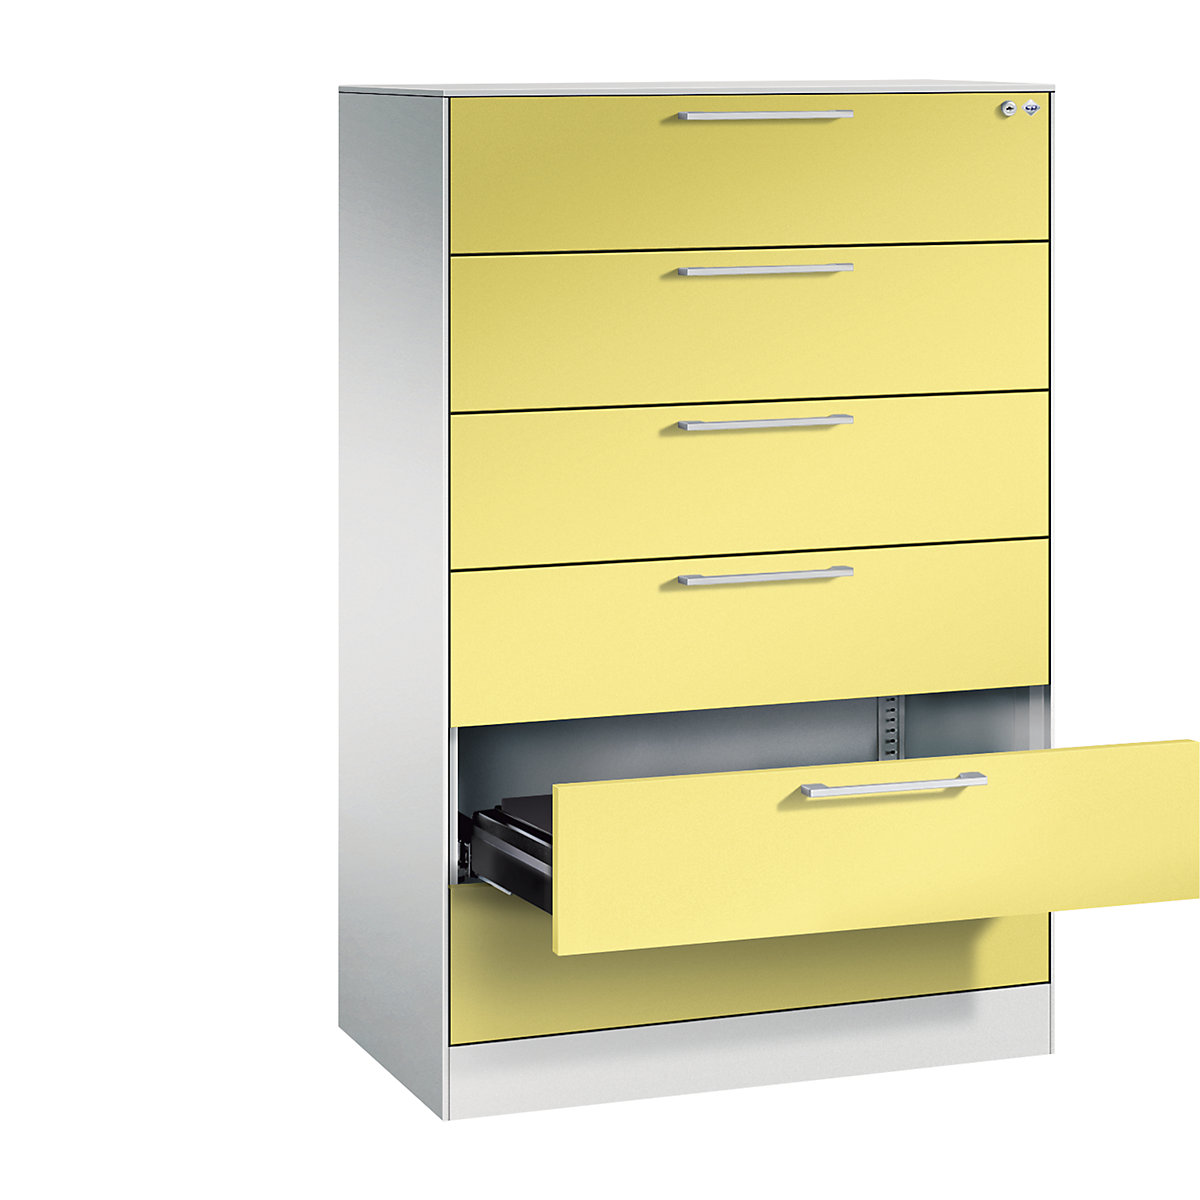 ASISTO card file cabinet – C+P, height 1292 mm, with 6 drawers, A5 landscape, light grey/sulphur yellow-4